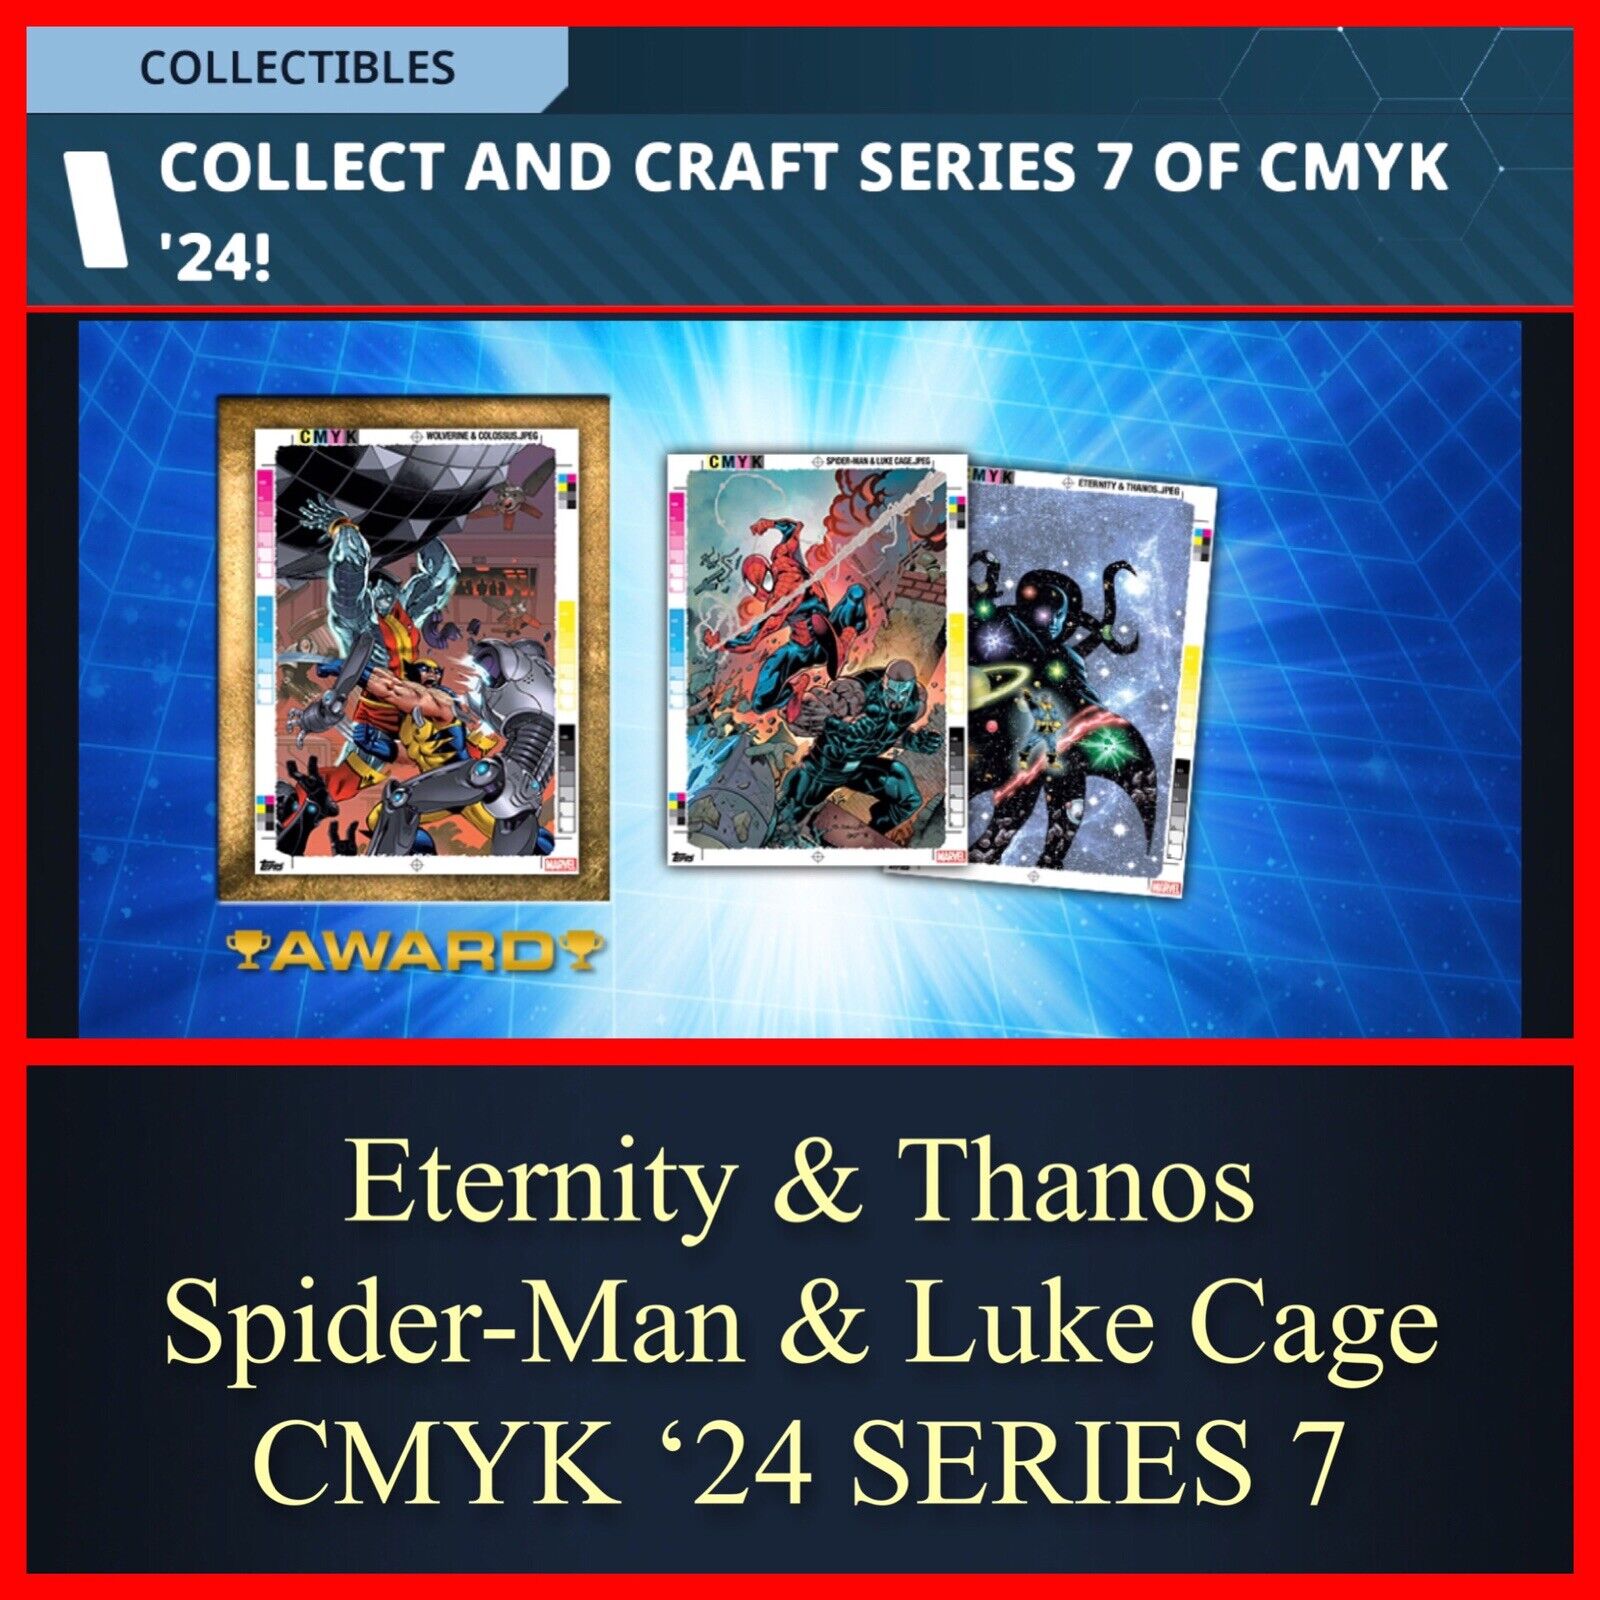 ETERNITY THANOS SPIDER-MAN LUKE CAGE-CMYK SERIES 7-10 CARDS-TOPPS MARVEL COLLECT